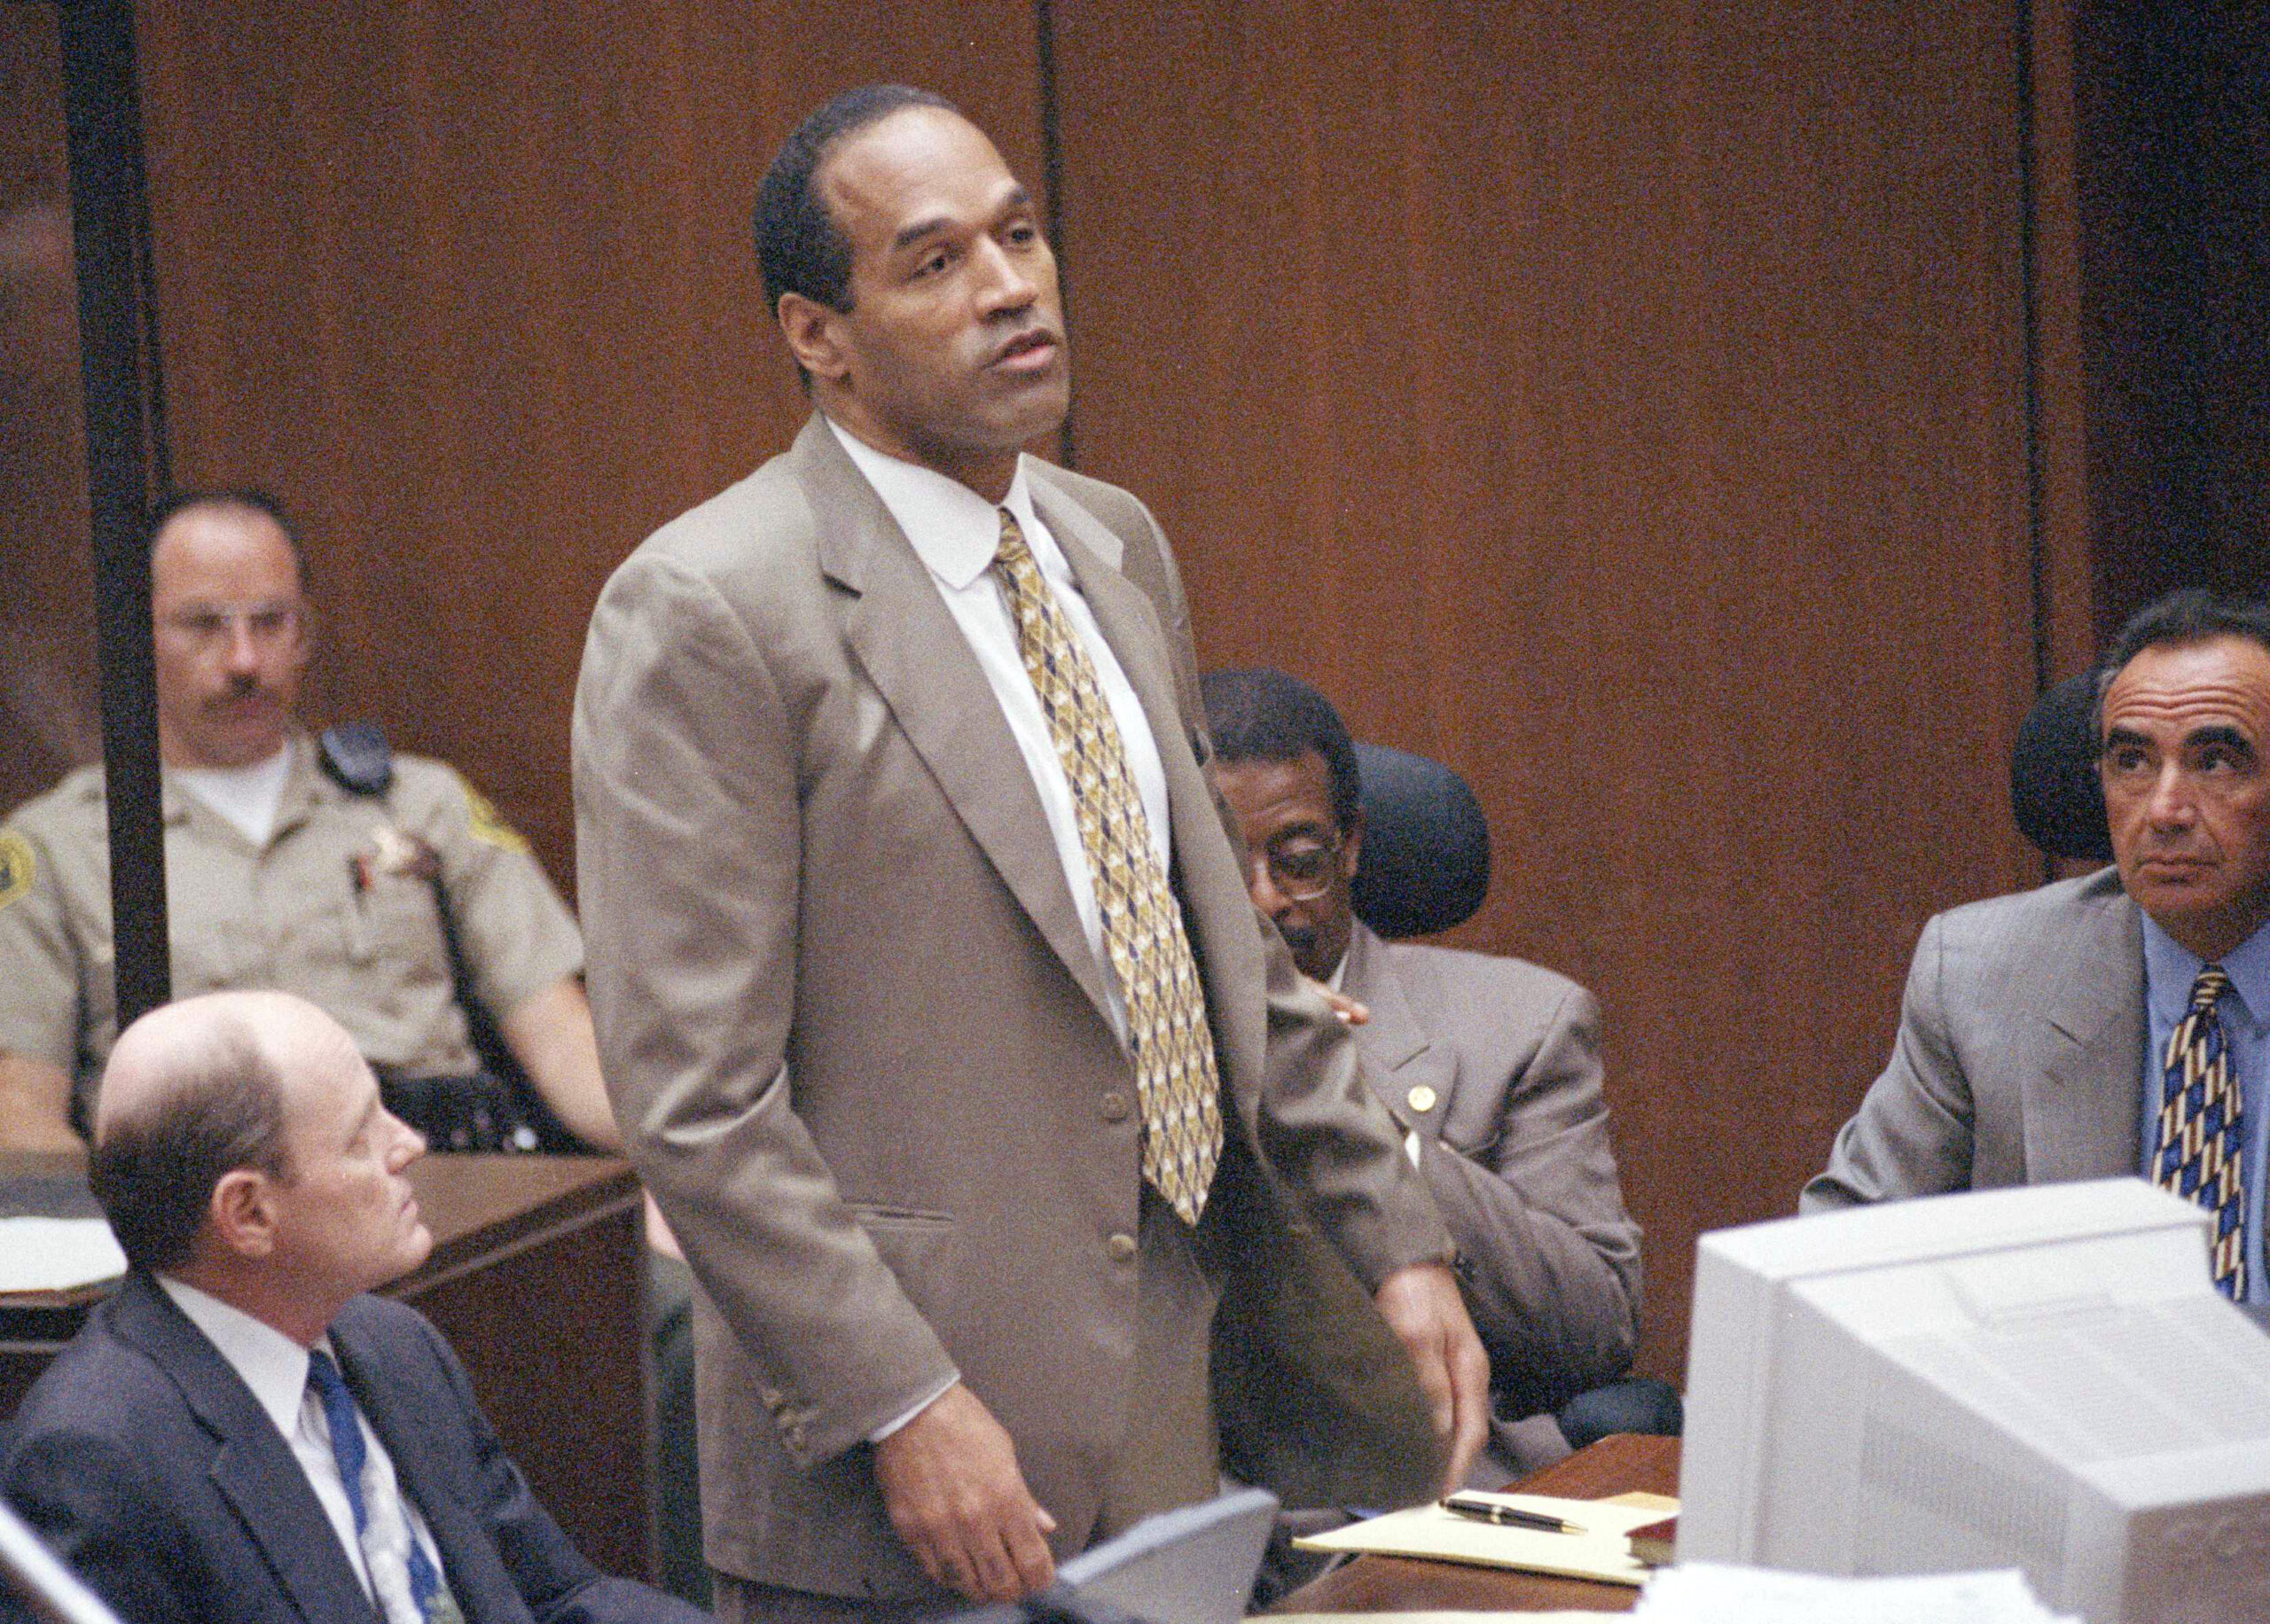 SPORTS HISTORY IN BLACK: O.J. Simpson goes on trial for murder